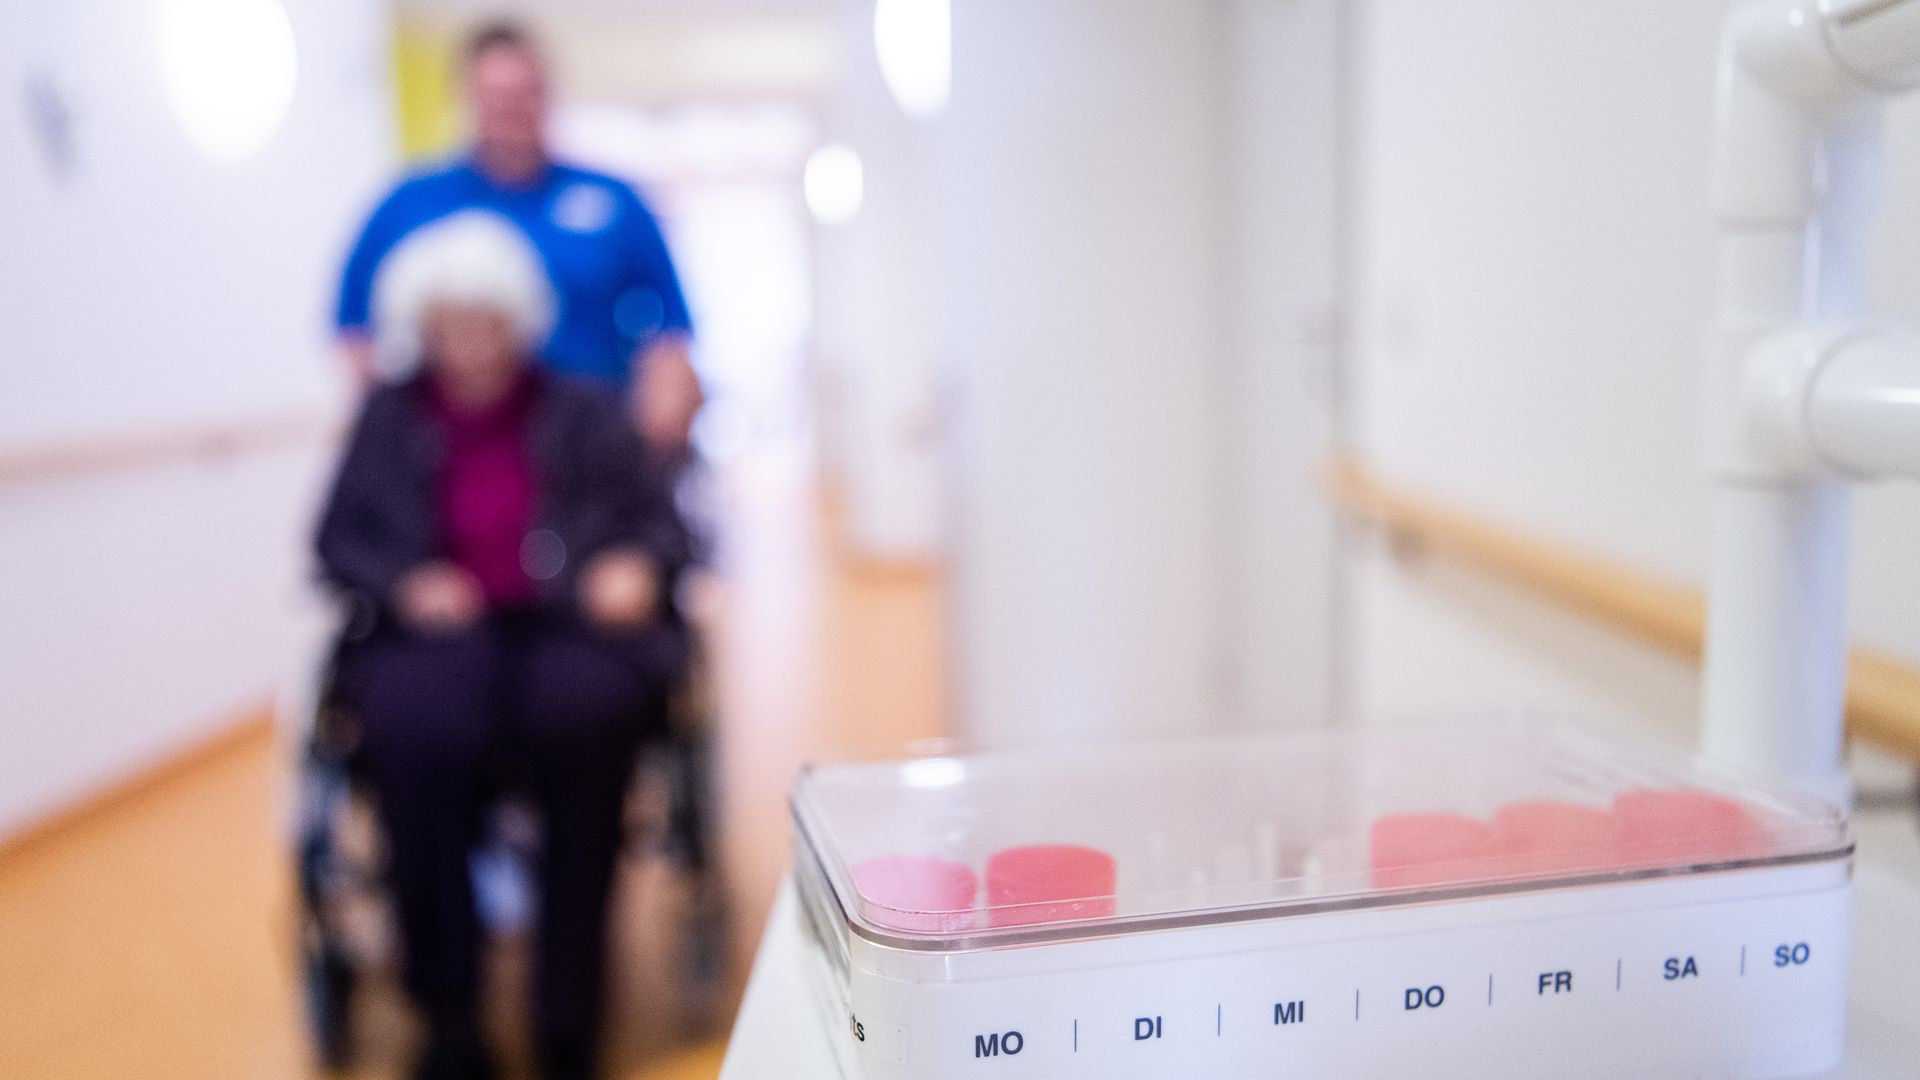 In a nursing home, a box of tablets stands on a supply trolley in the hallway.